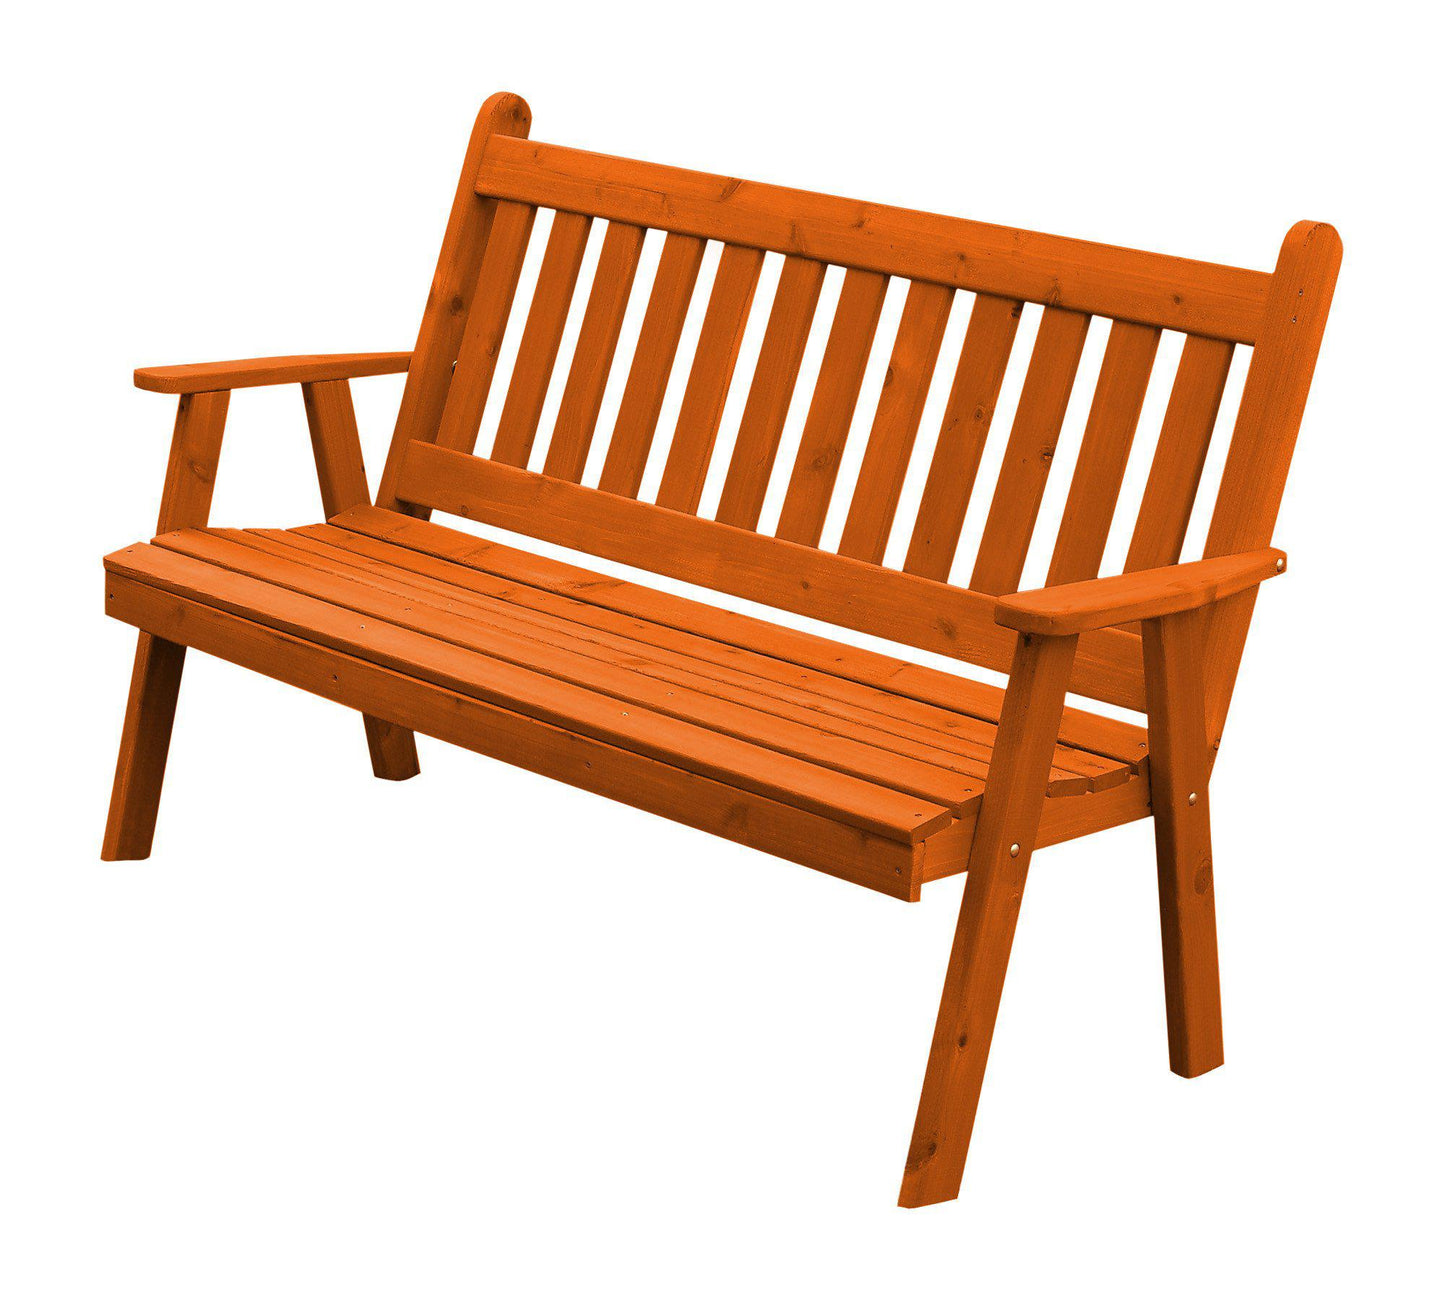 A&L Furniture Co. Western Red Cedar 5' Traditional English Garden Bench - LEAD TIME TO SHIP 4 WEEKS OR LESS